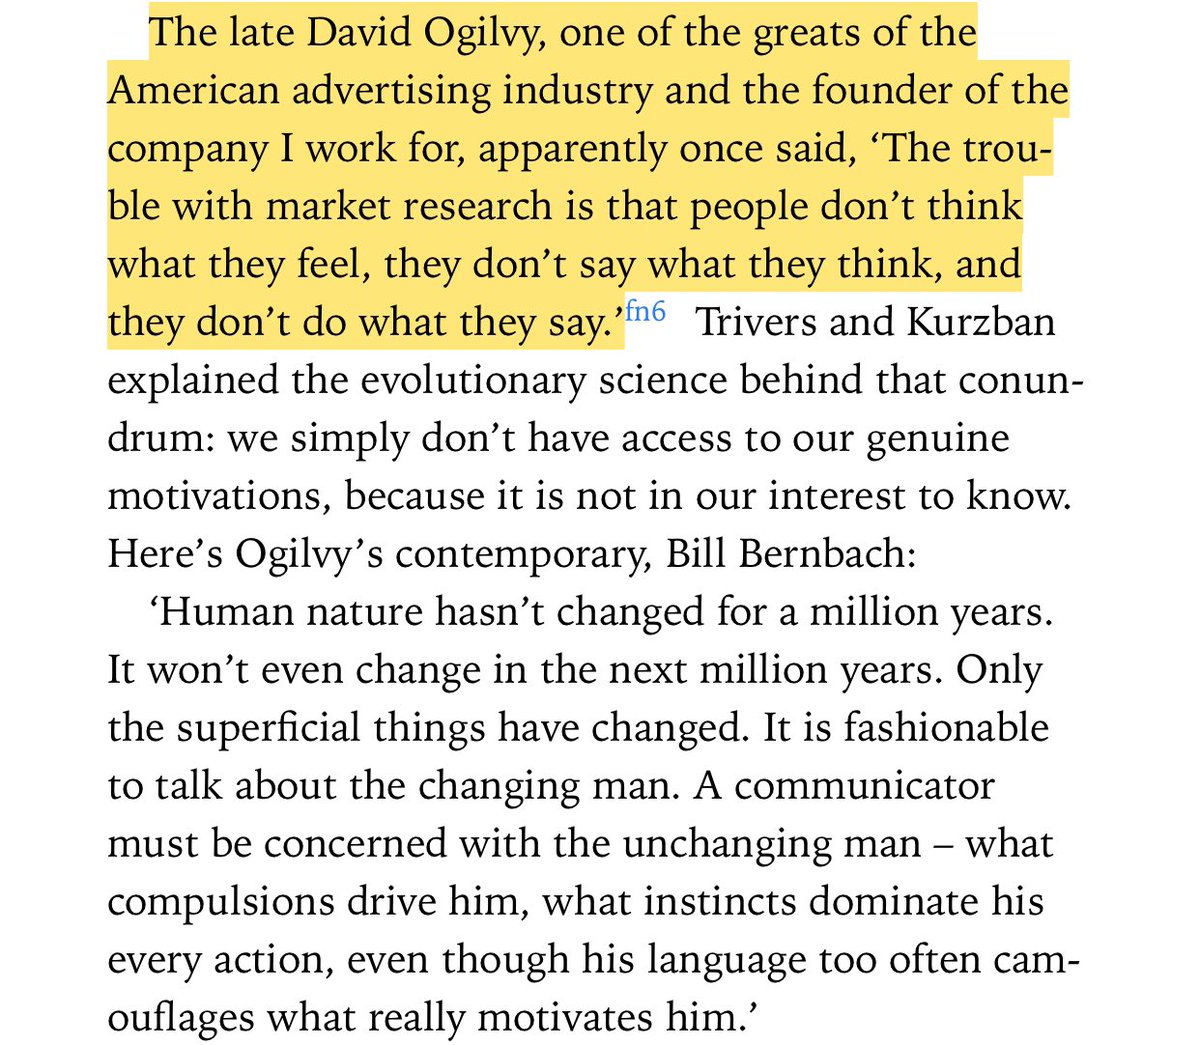 “The trouble with market research is that people don’t think what they feel, they don’t say what they think, and they don’t do what they say.” —David Ogilvy